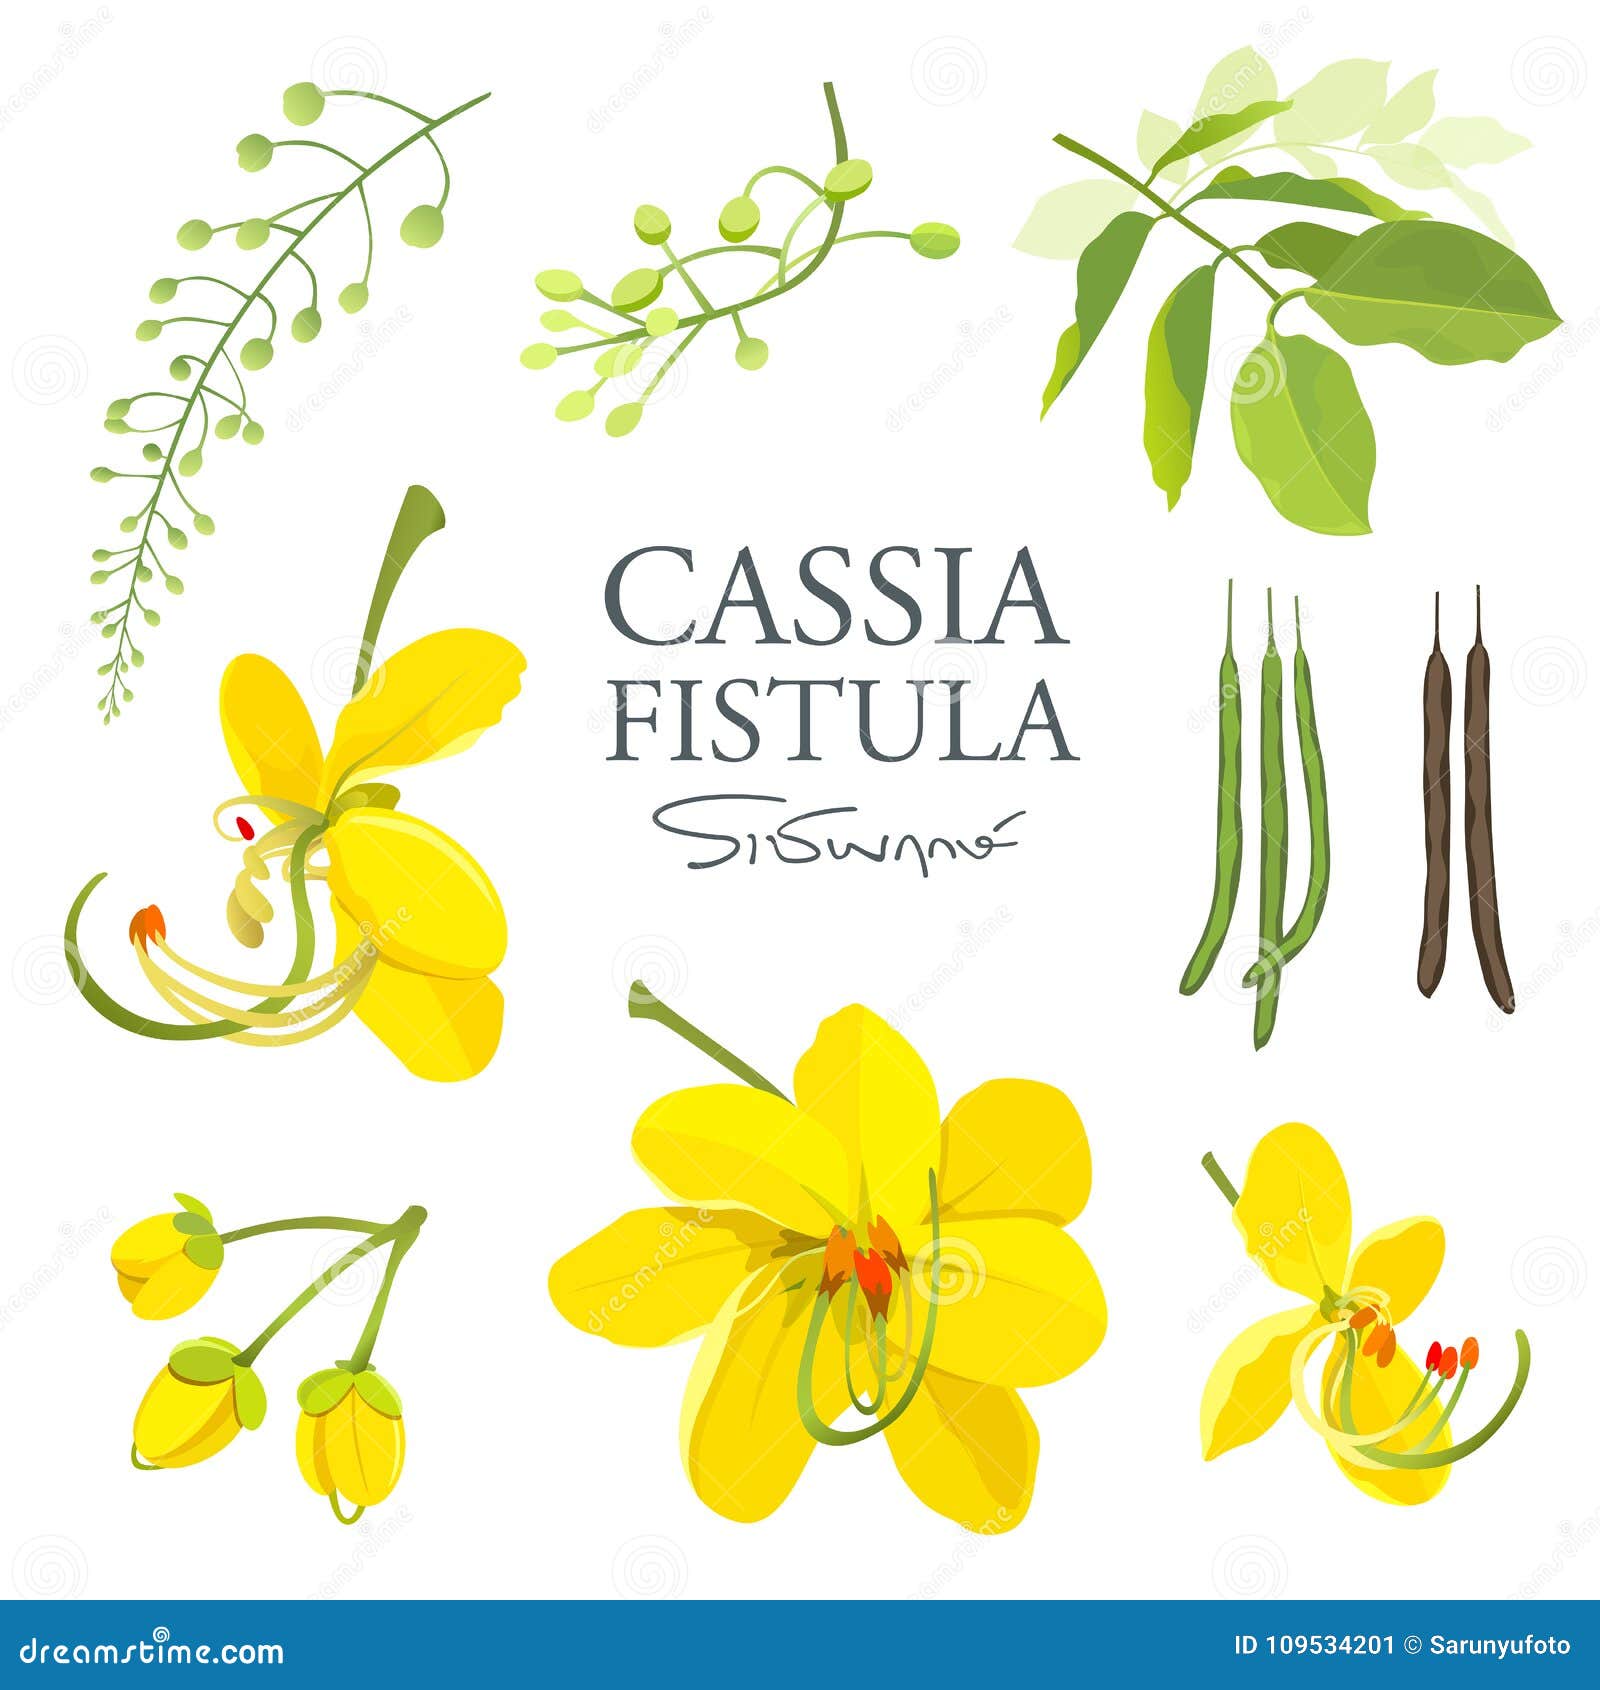 national flower of thailand, cassia fistula, beautiful yellow thai flower collections